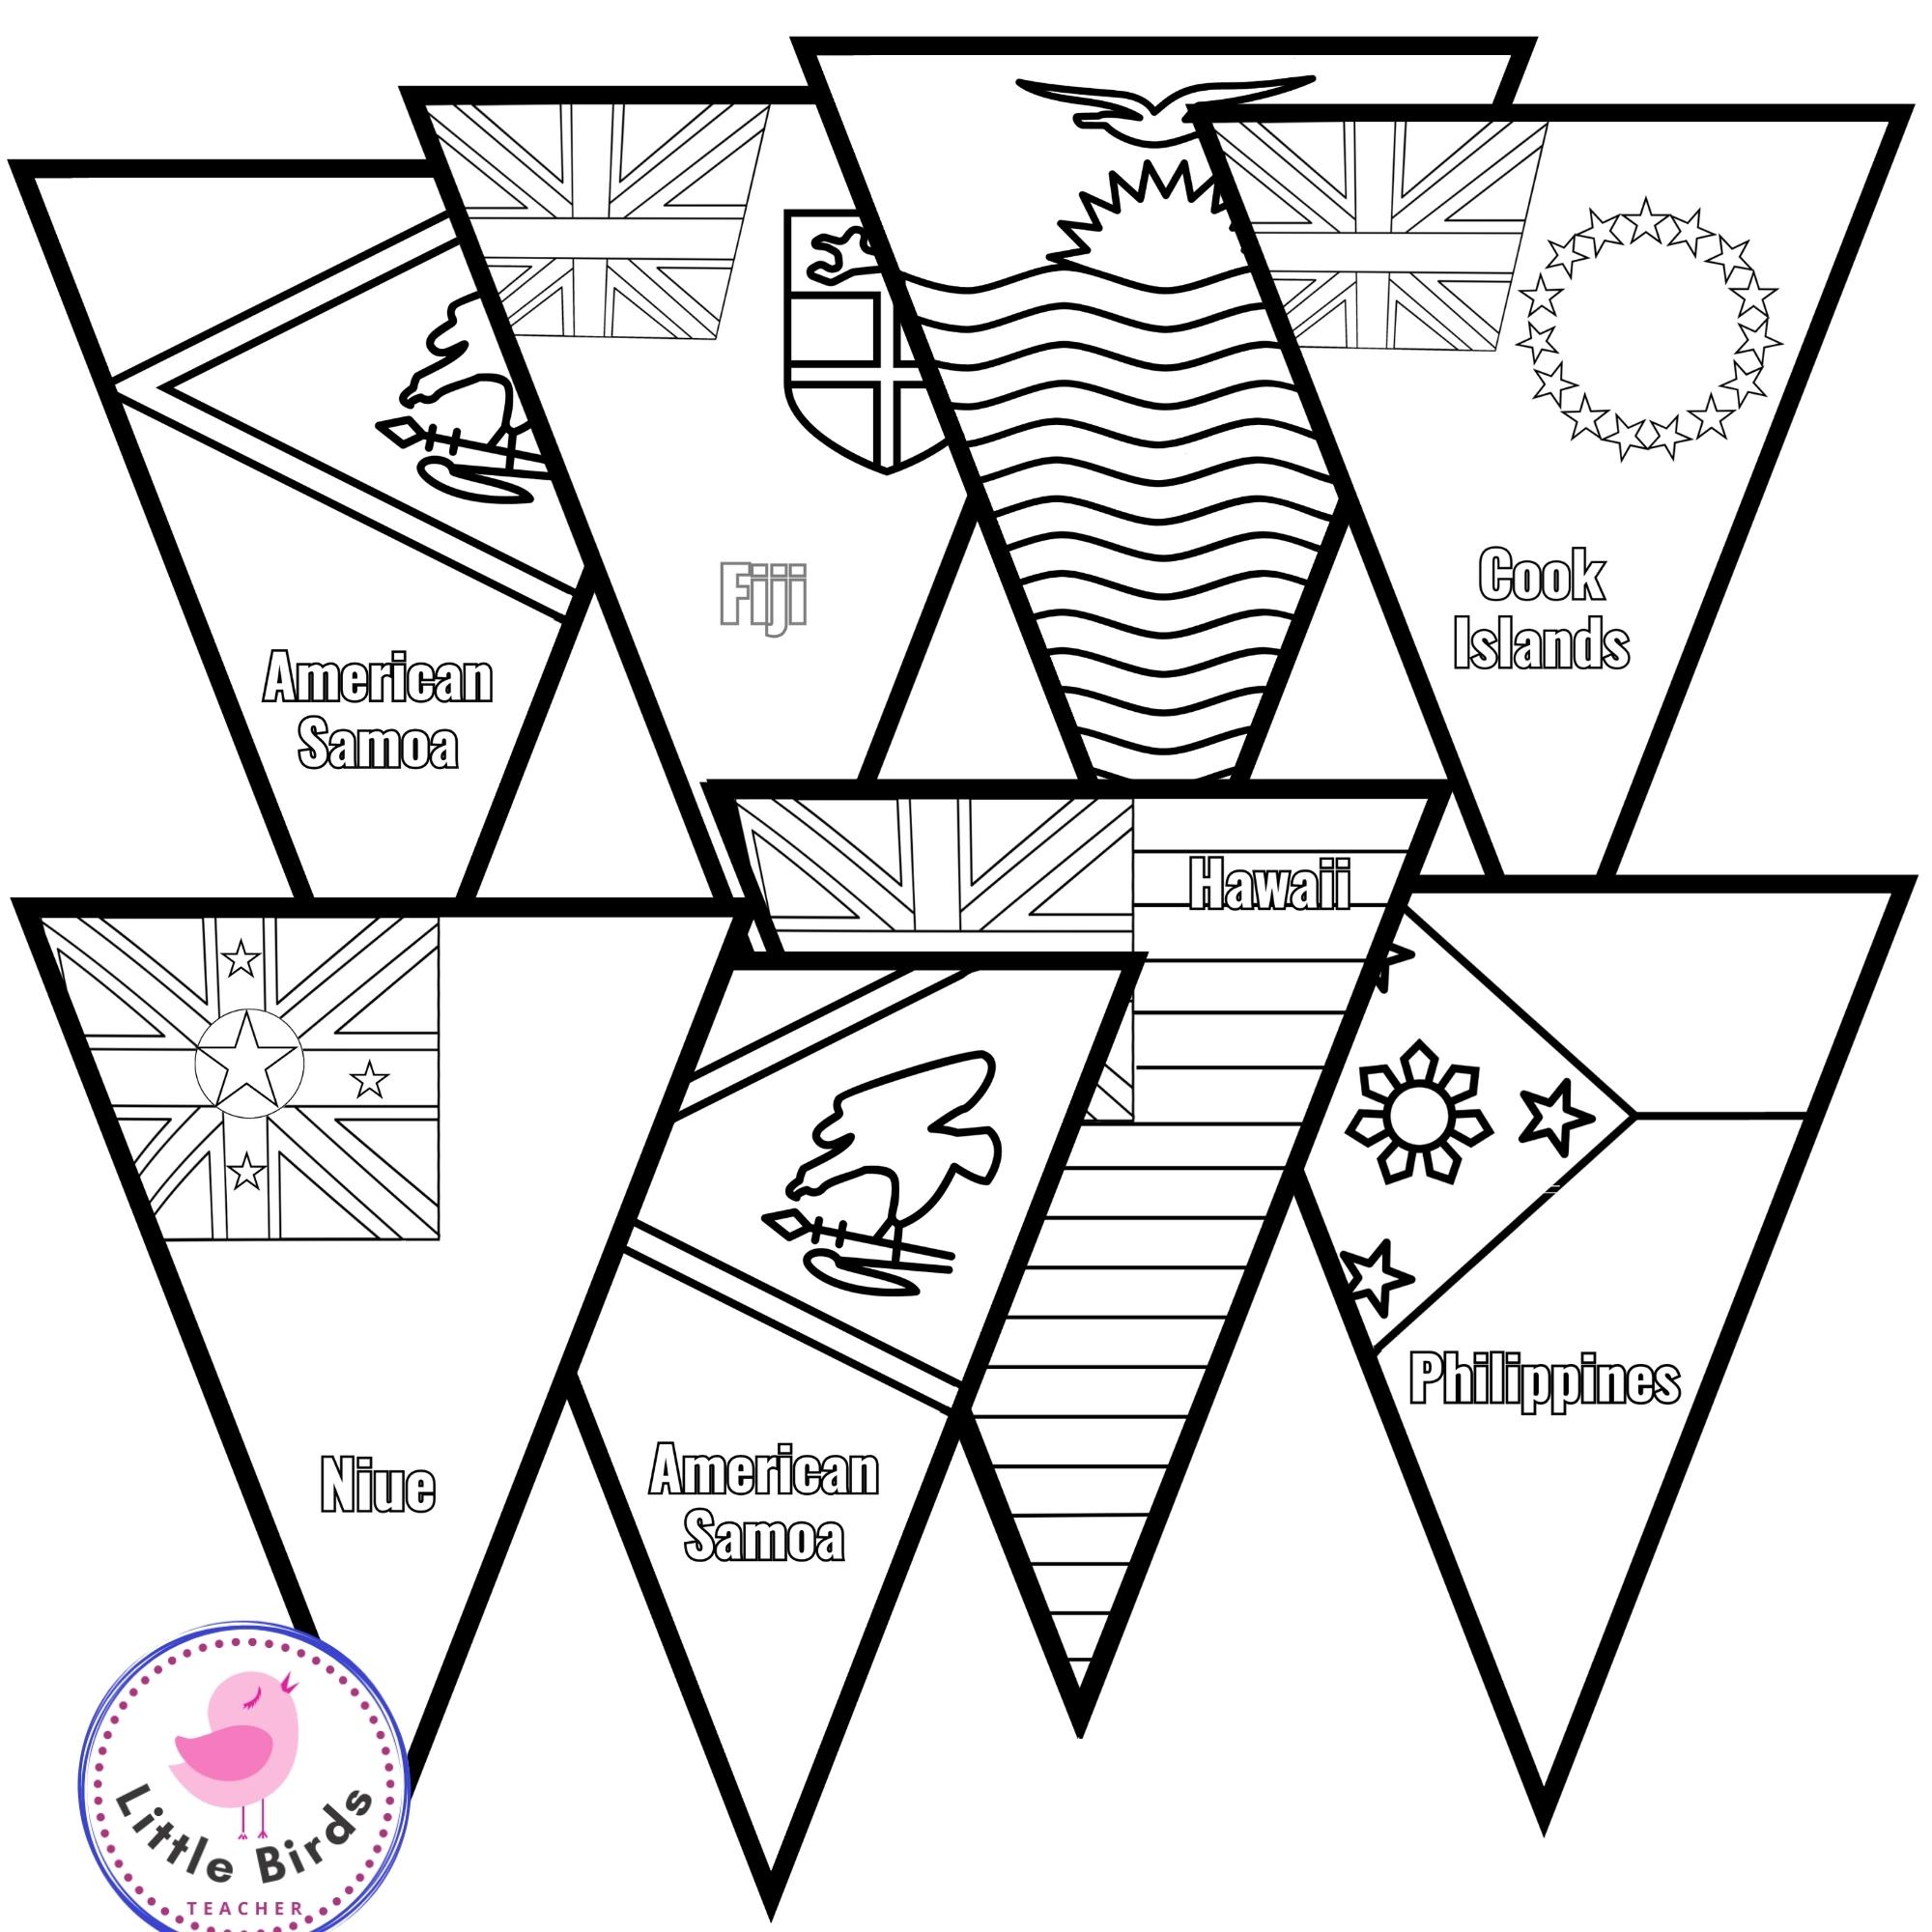 Asian pacific american heritage month countries flag pennants coloring pages made by teachers